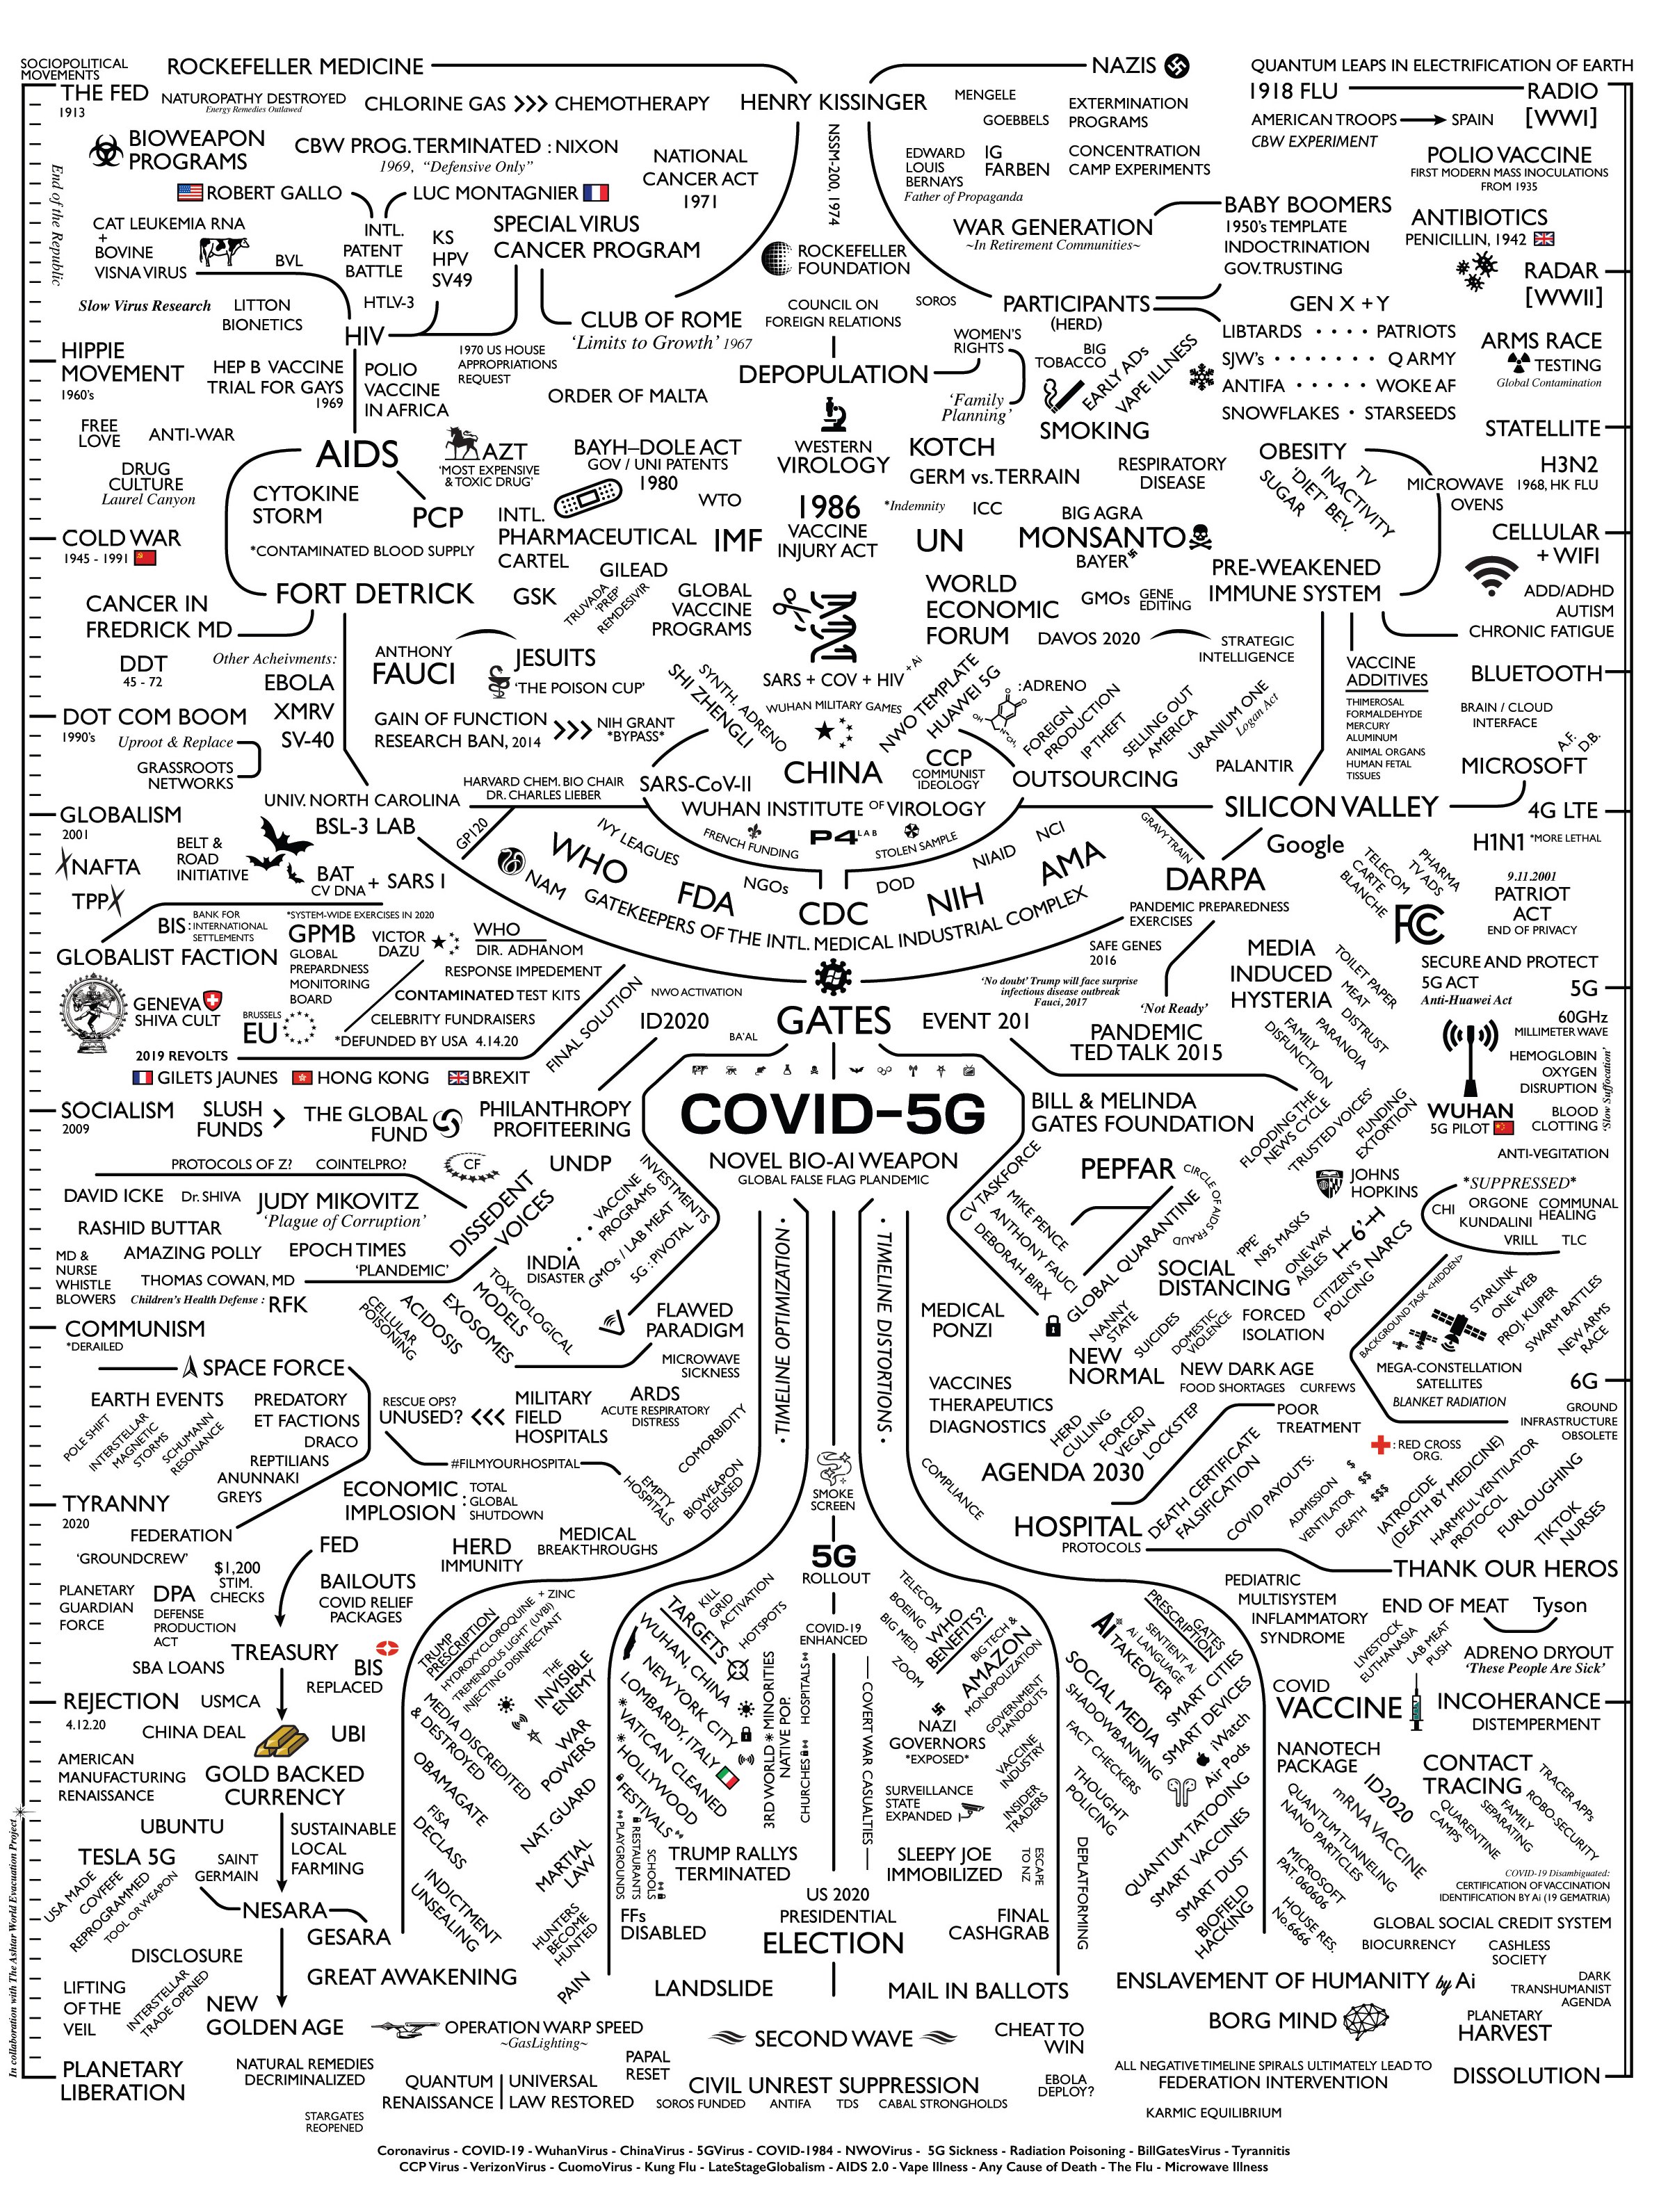 deepstatemappingproject.com - A timeline showing the lead-up to COVID the many agendas at play and multiple possible future outcomes.jpg